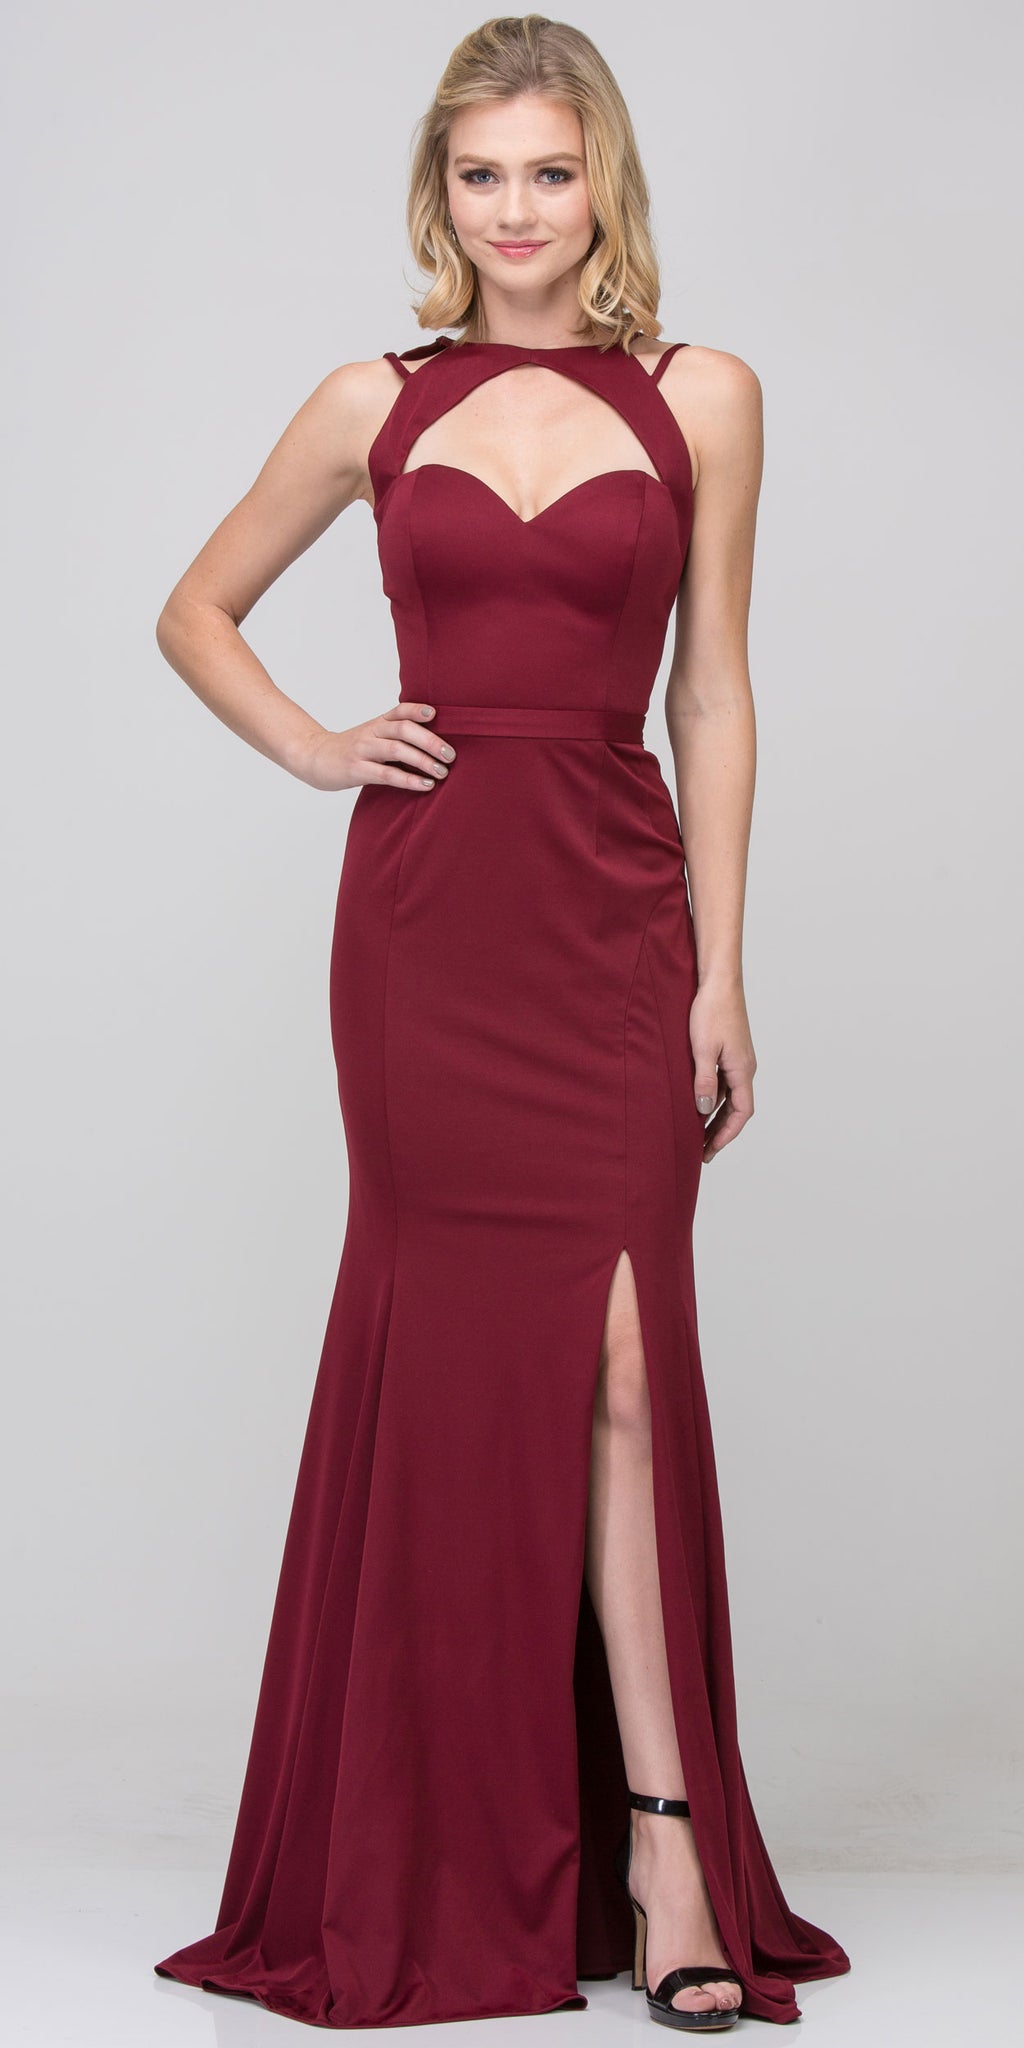 Main image of Cutout Sweetheart Neckline Long Fitted Formal Prom Dress